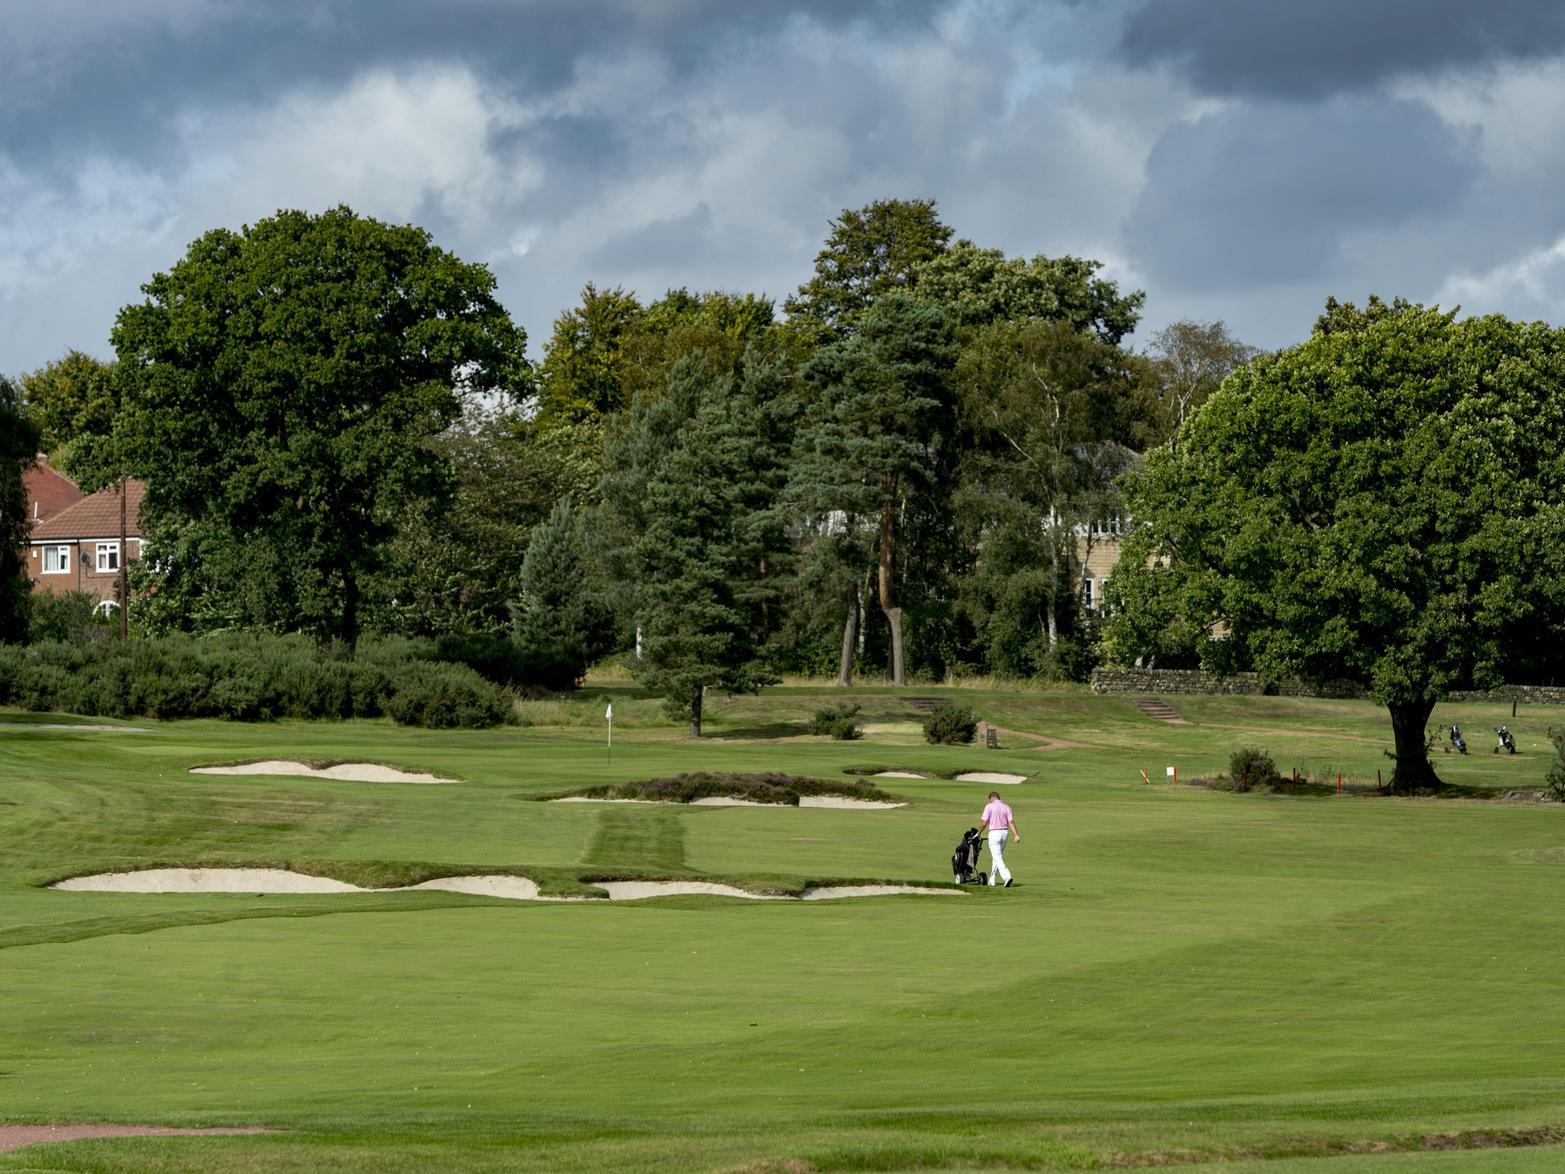 Home to the popular Moortown golf club, Moortown is home to all sorts of people from young professionals to the retired.